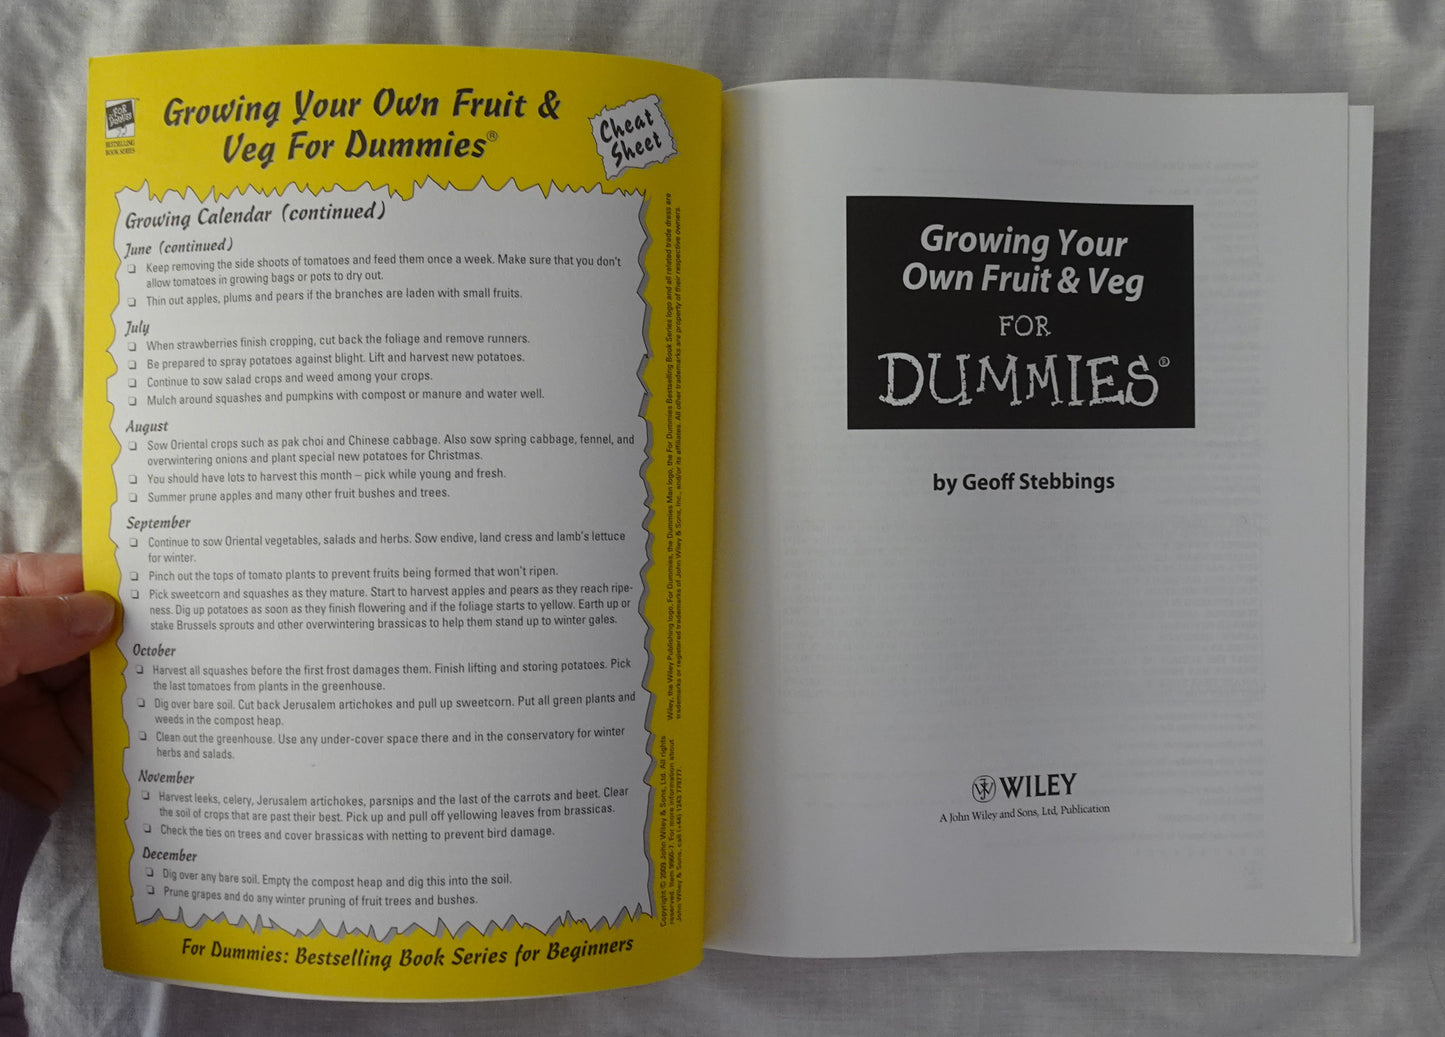 Growing Your Own Fruit & Veg for Dummies by Geoff Stebbings